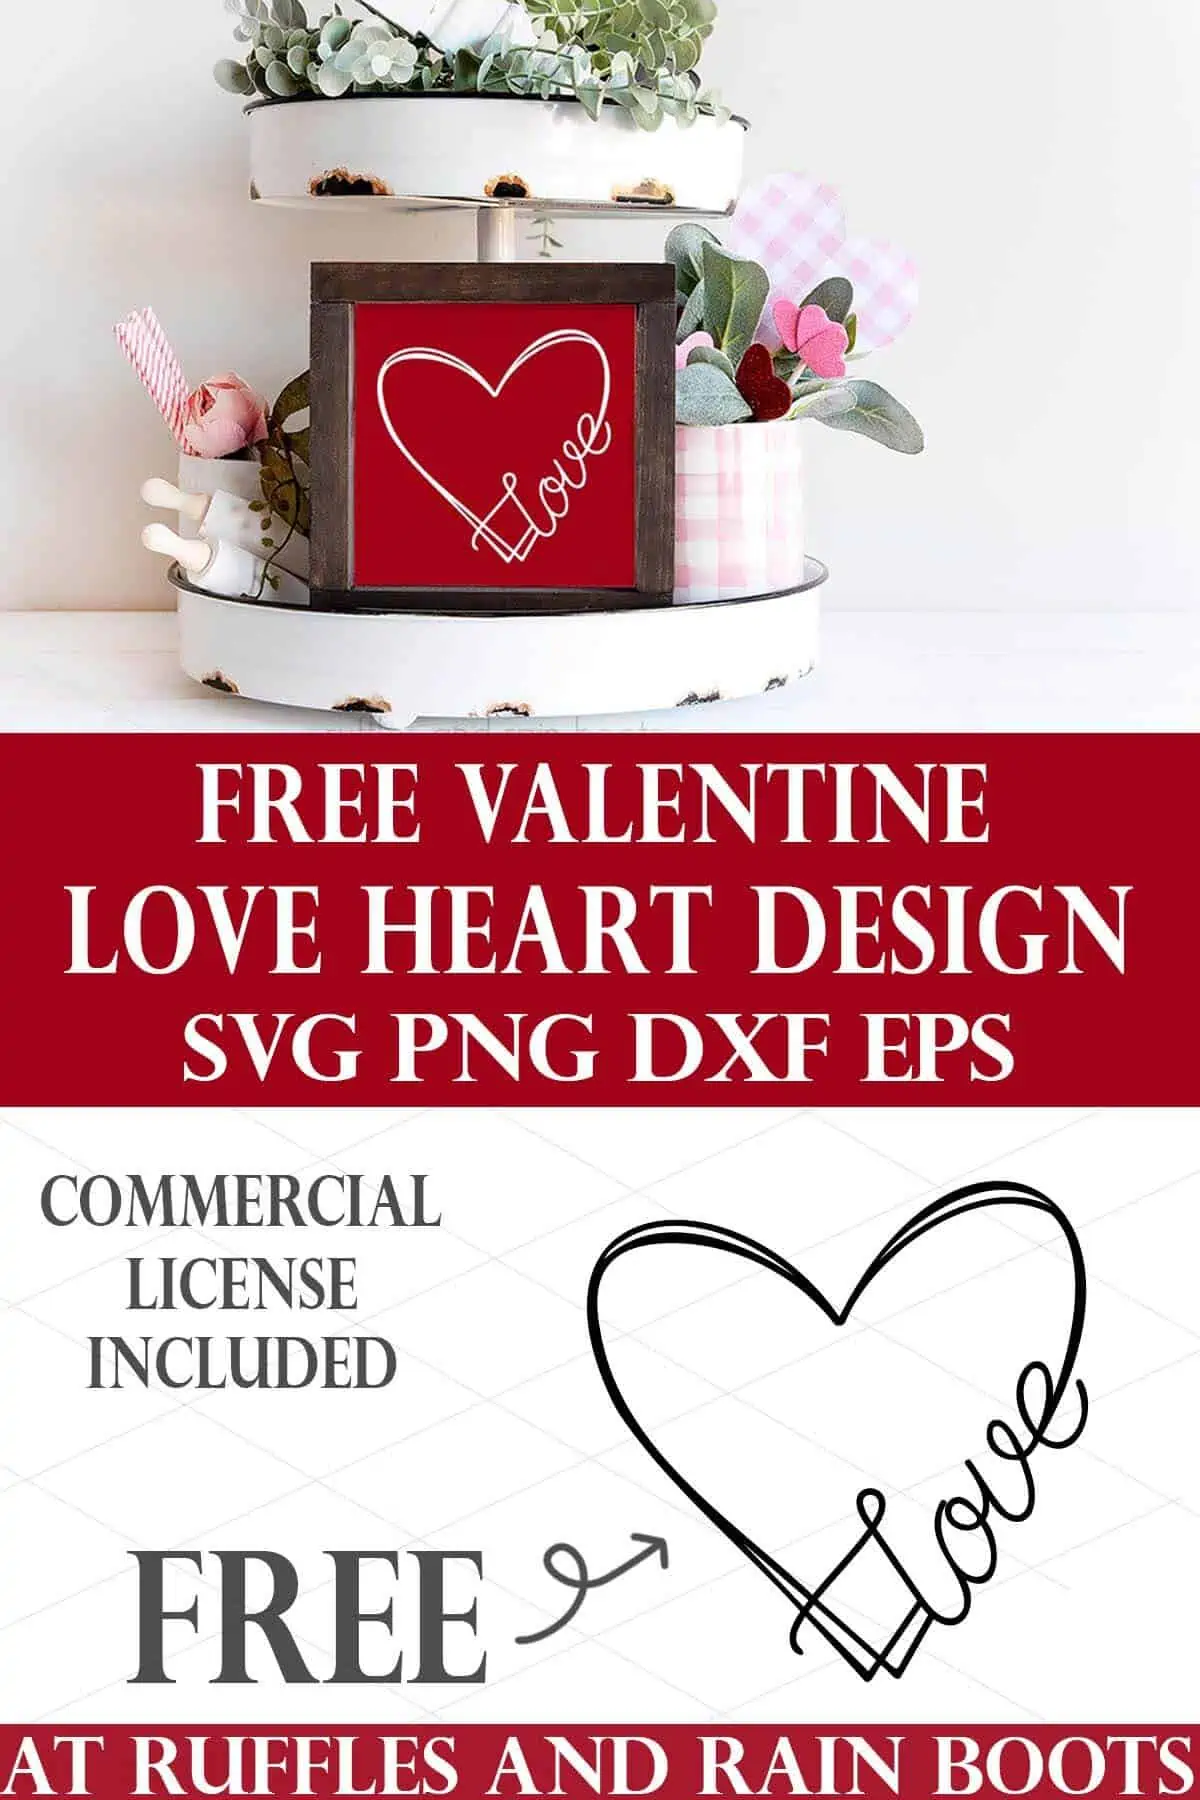 Vertical stacked image showing the hand drawn heart love svg on bottom with the image in white vinyl on a red sign placed on a tiered tray with text which reads free valentine love heart design.